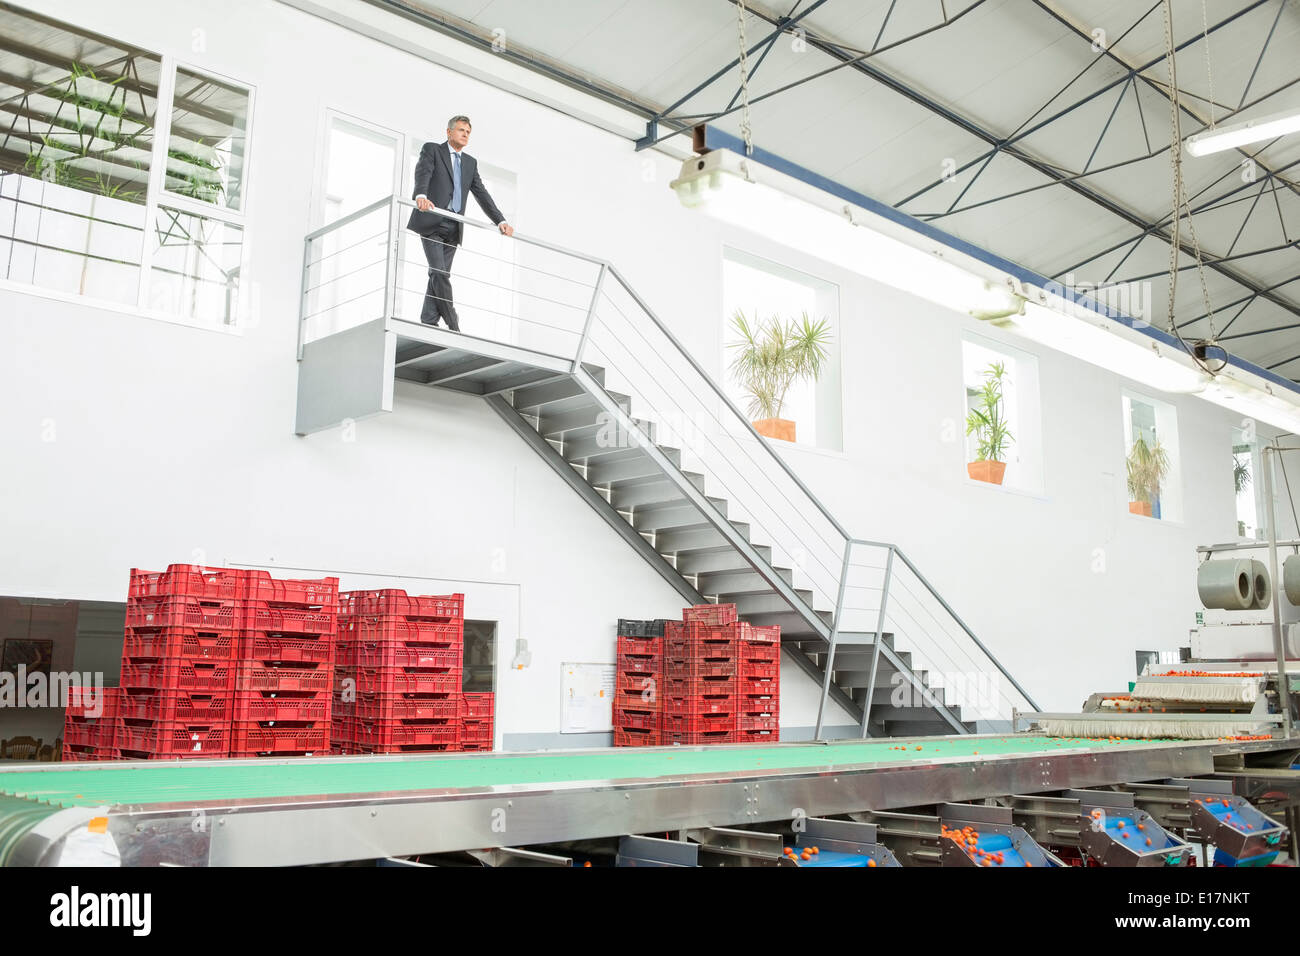 Supervisor standing on platform in food processing plant Stock Photo